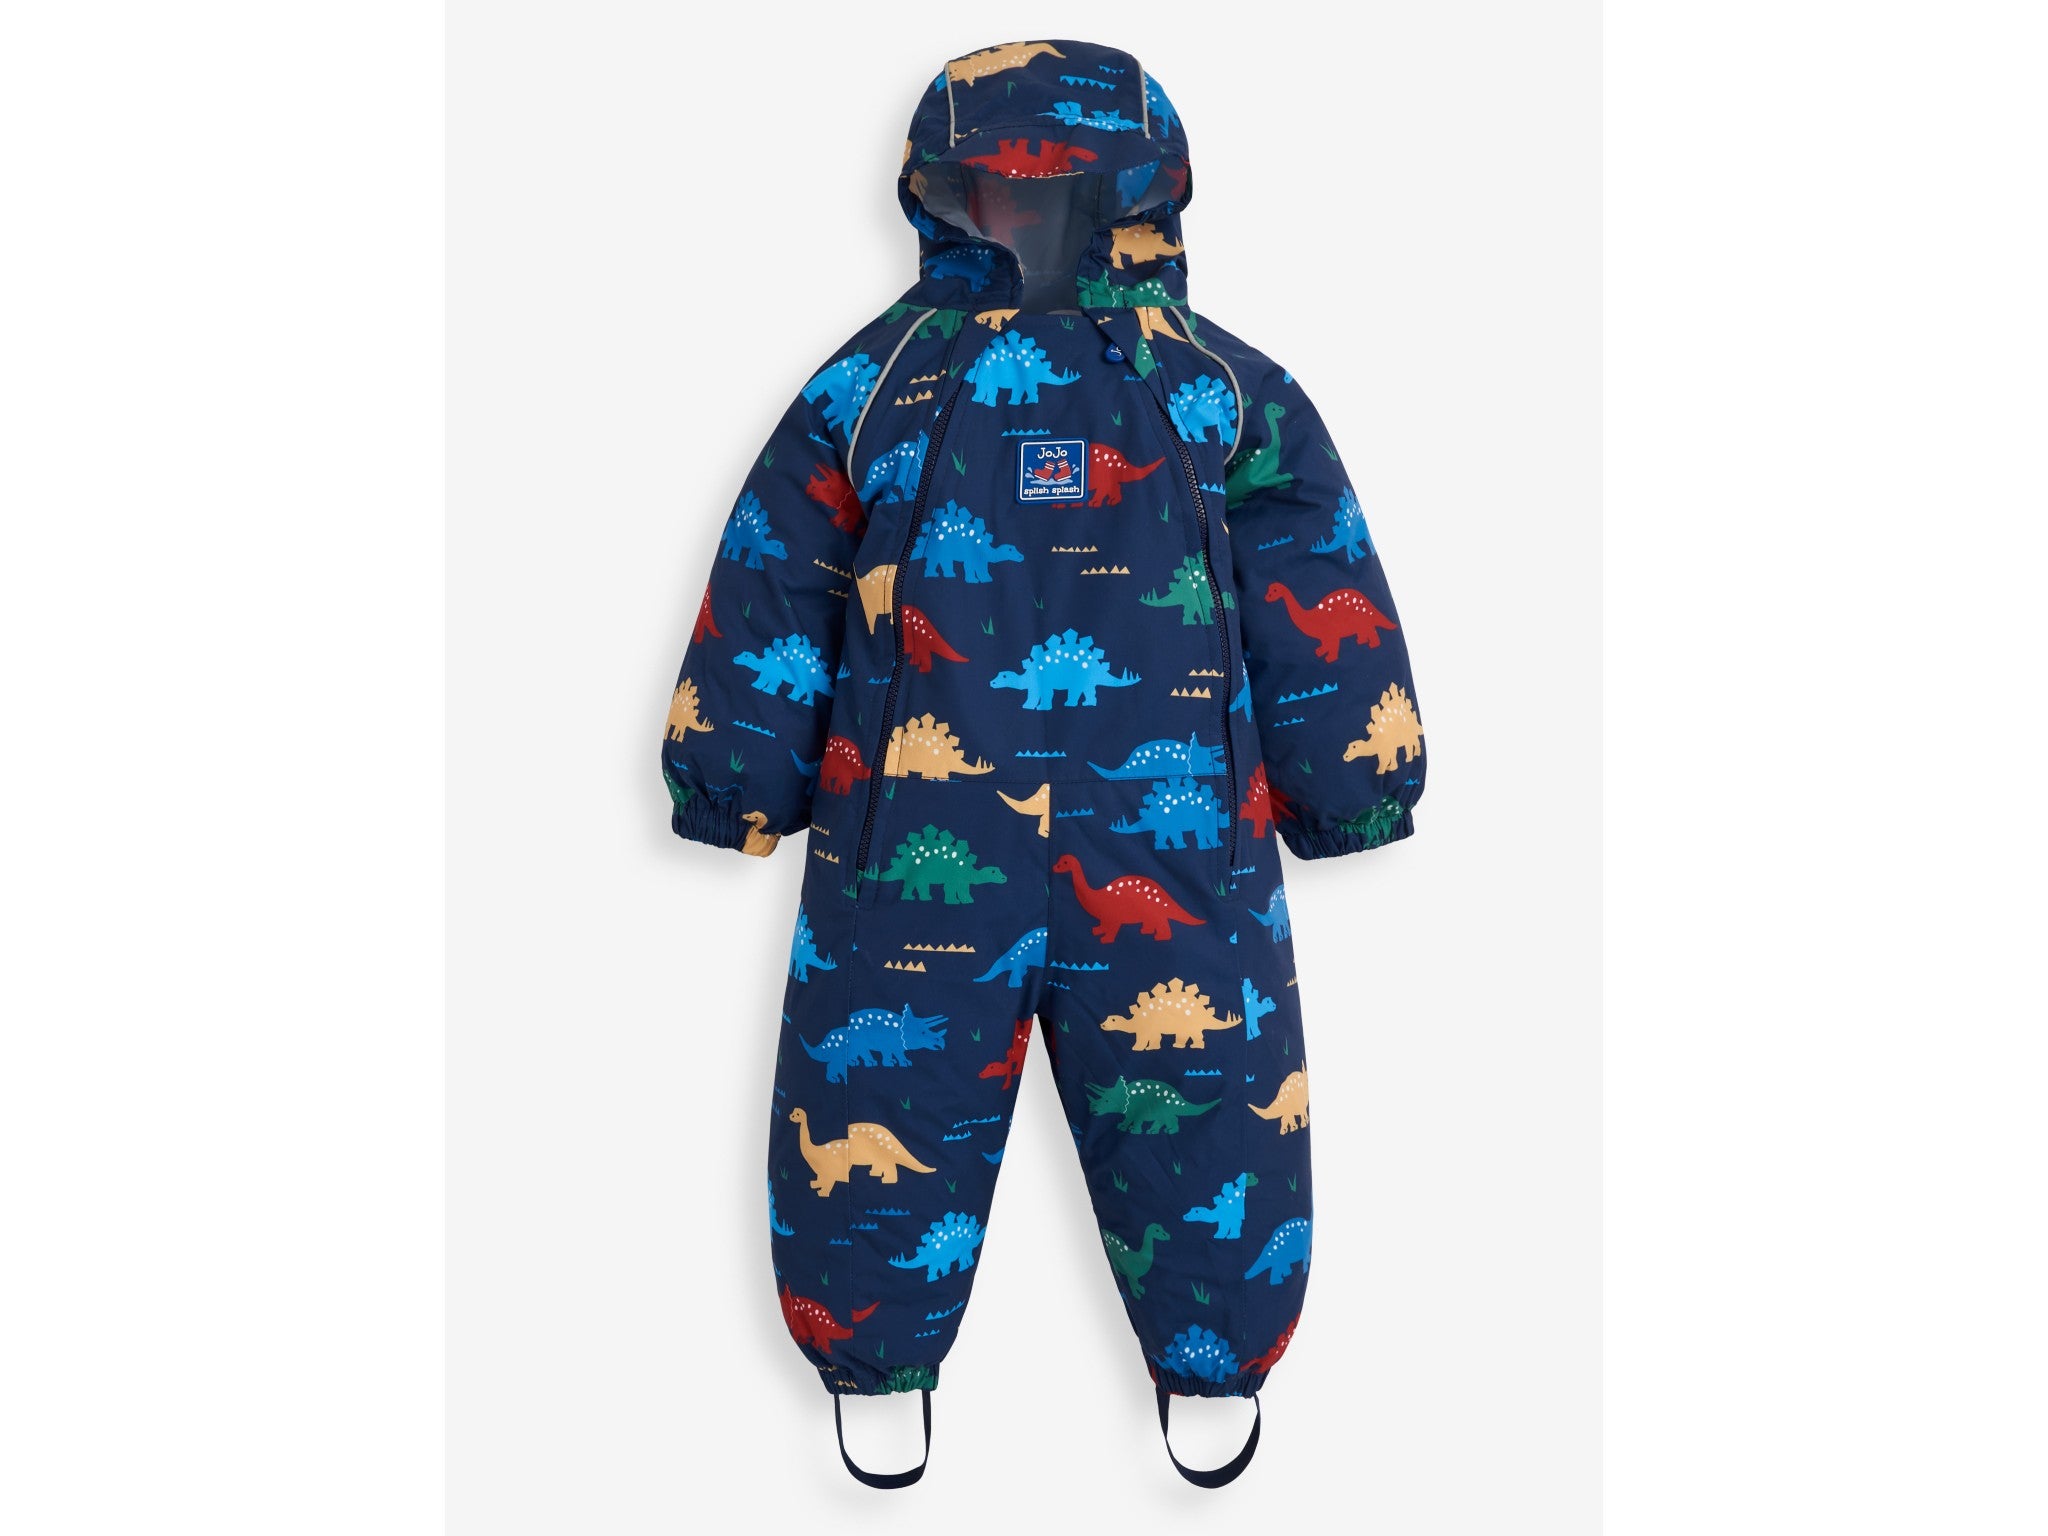 Boys Super Soft Luxury Football Print All In One Sleep Suit 3-4 Years 